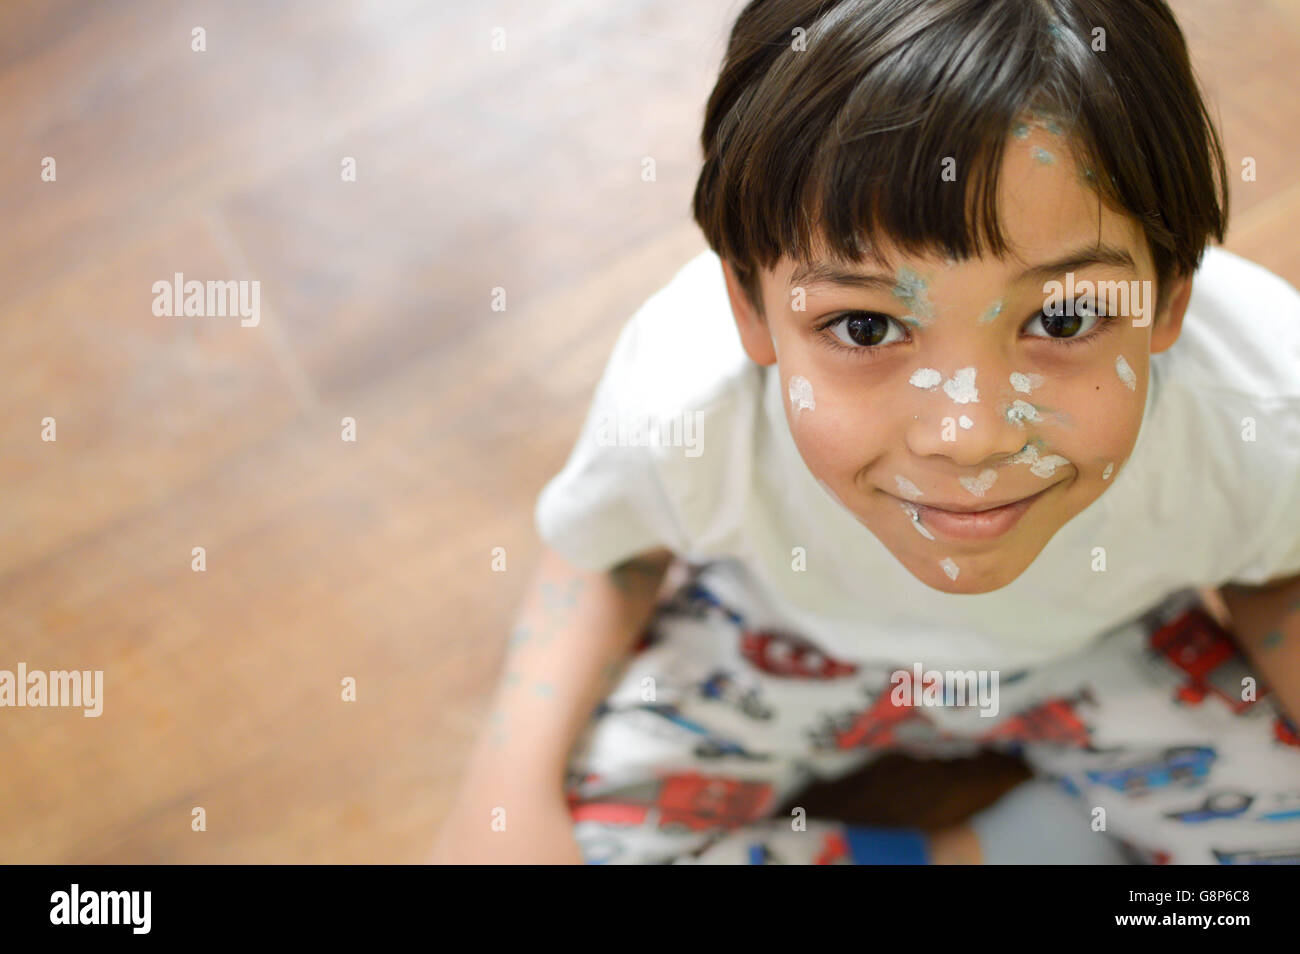 Young kid at home sick with chicken pox, white and green antiseptic cream applied to the rash Stock Photo